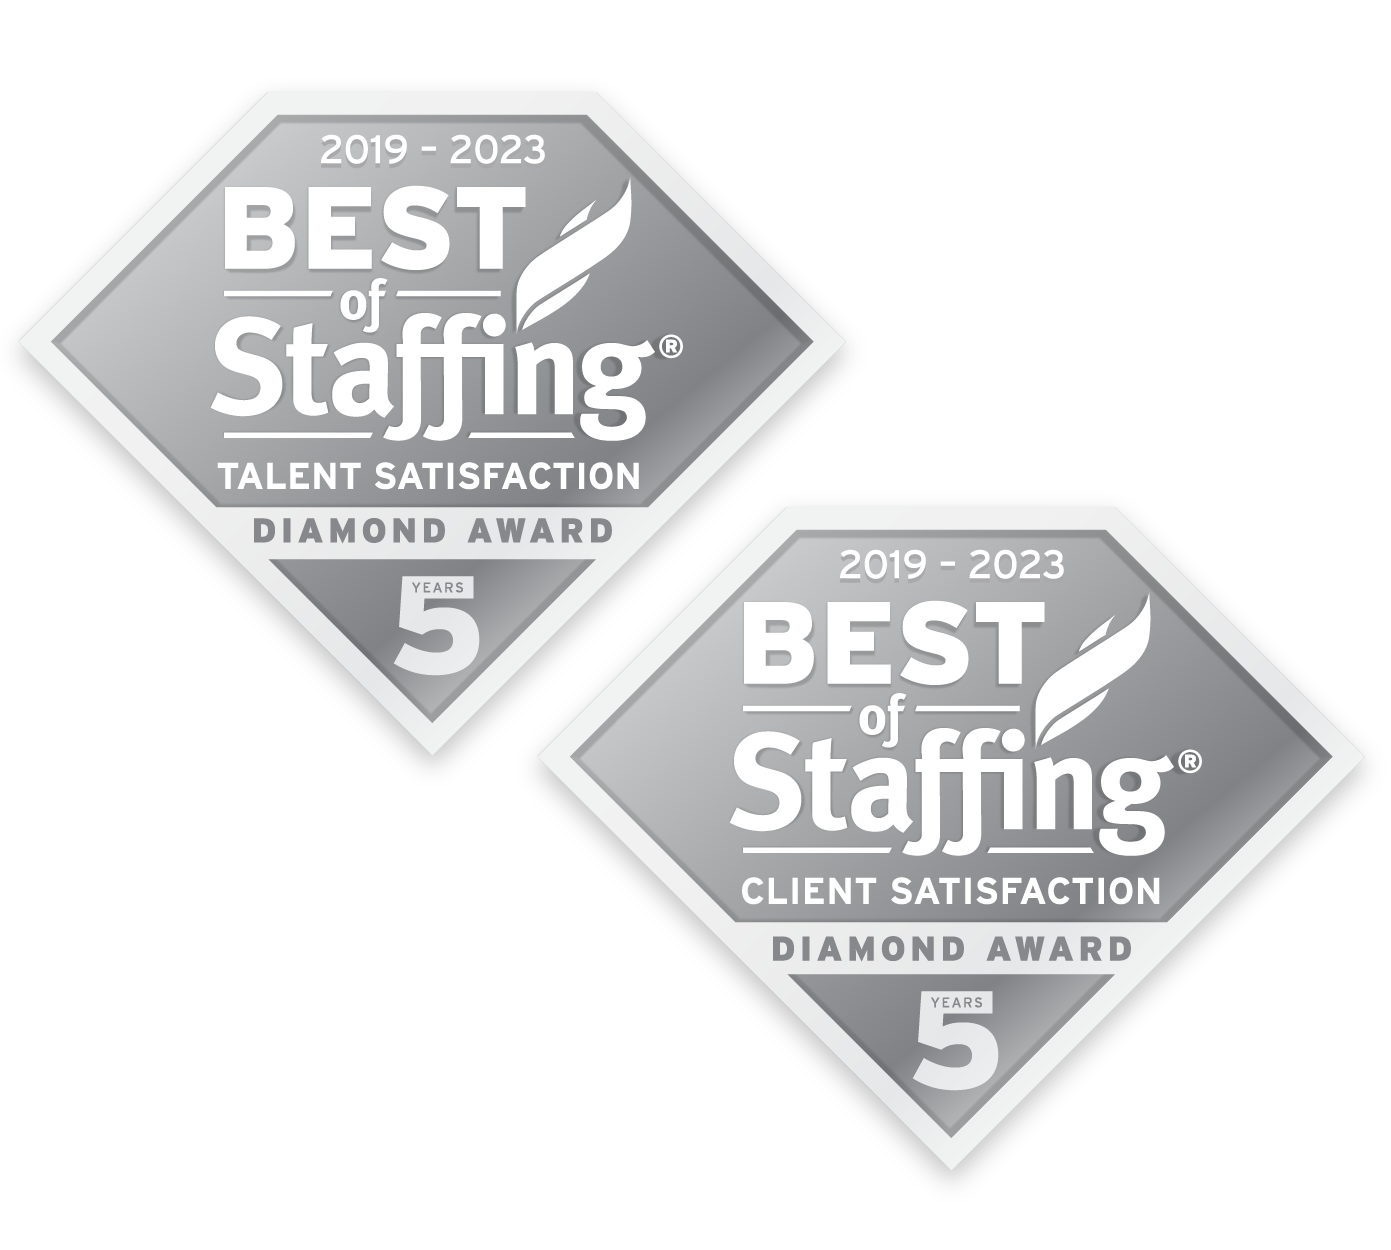 Eliassen Group and EG Life Sciences Win ClearlyRated’s 2023 Best of Staffing Client and Talent 5 Year Diamond Award for Service Excellence